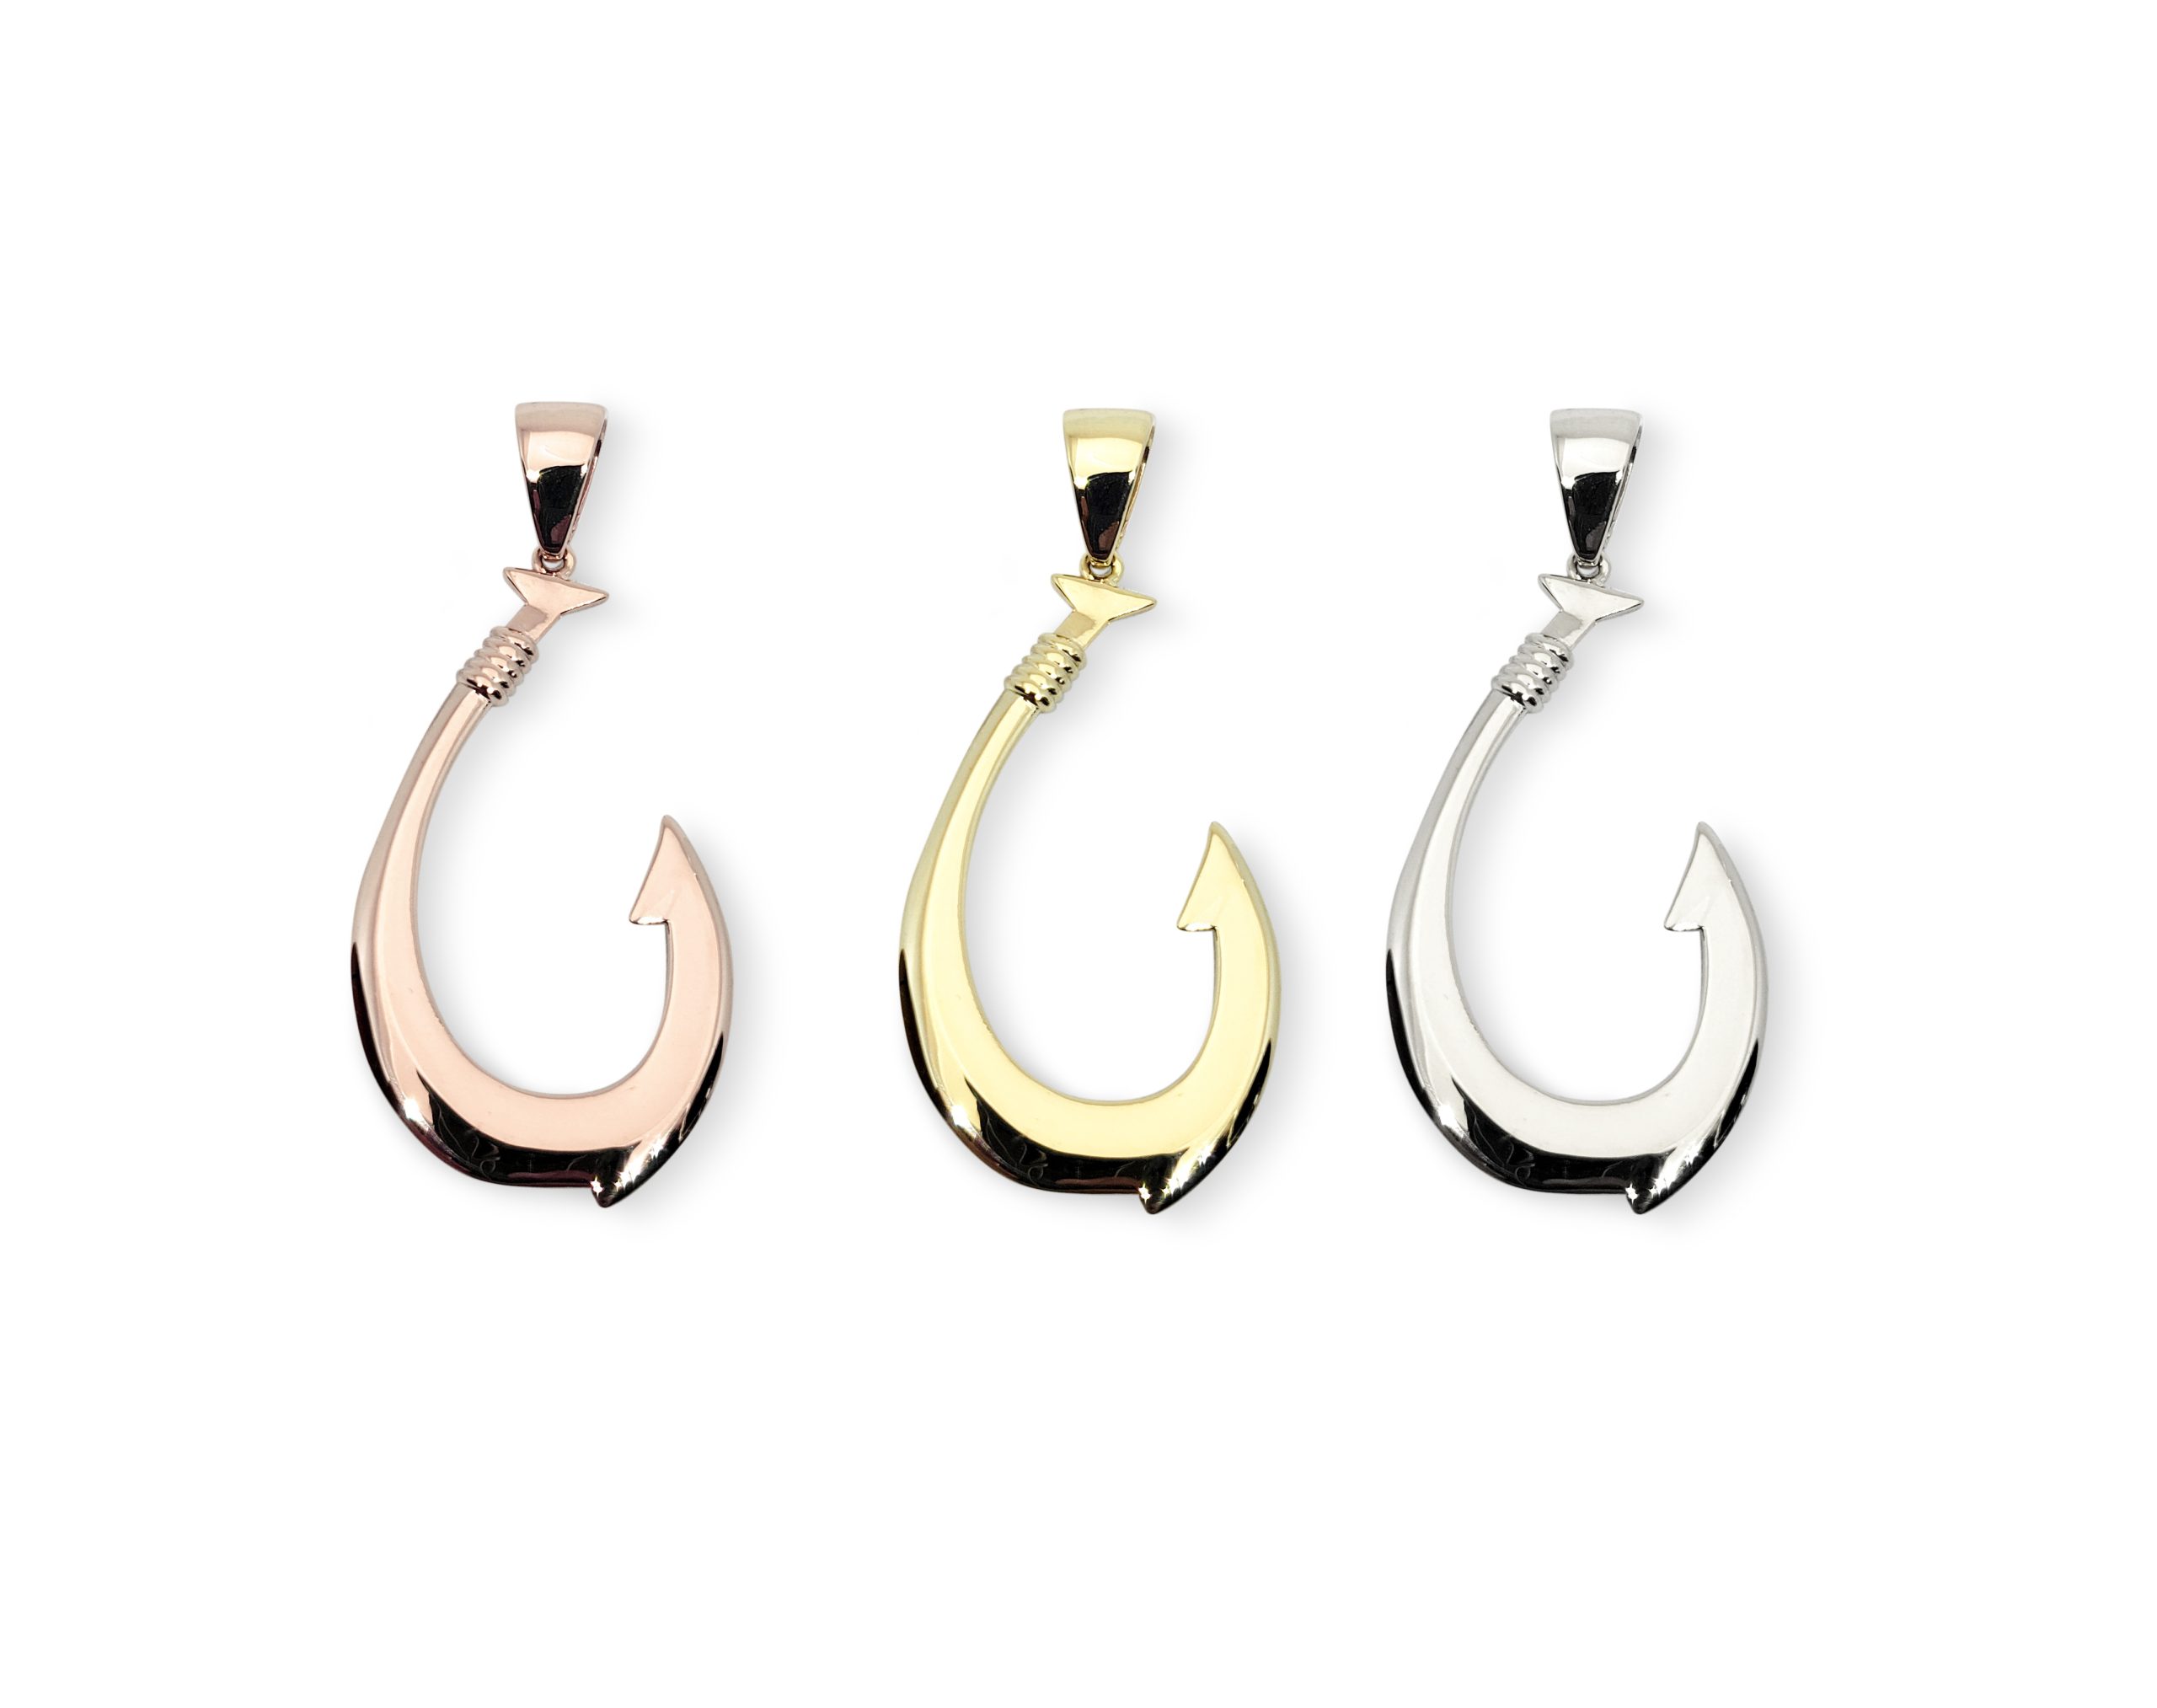 Solid 10K Yellow White or Rose Gold Fish Hook Pendant, large, 2 1